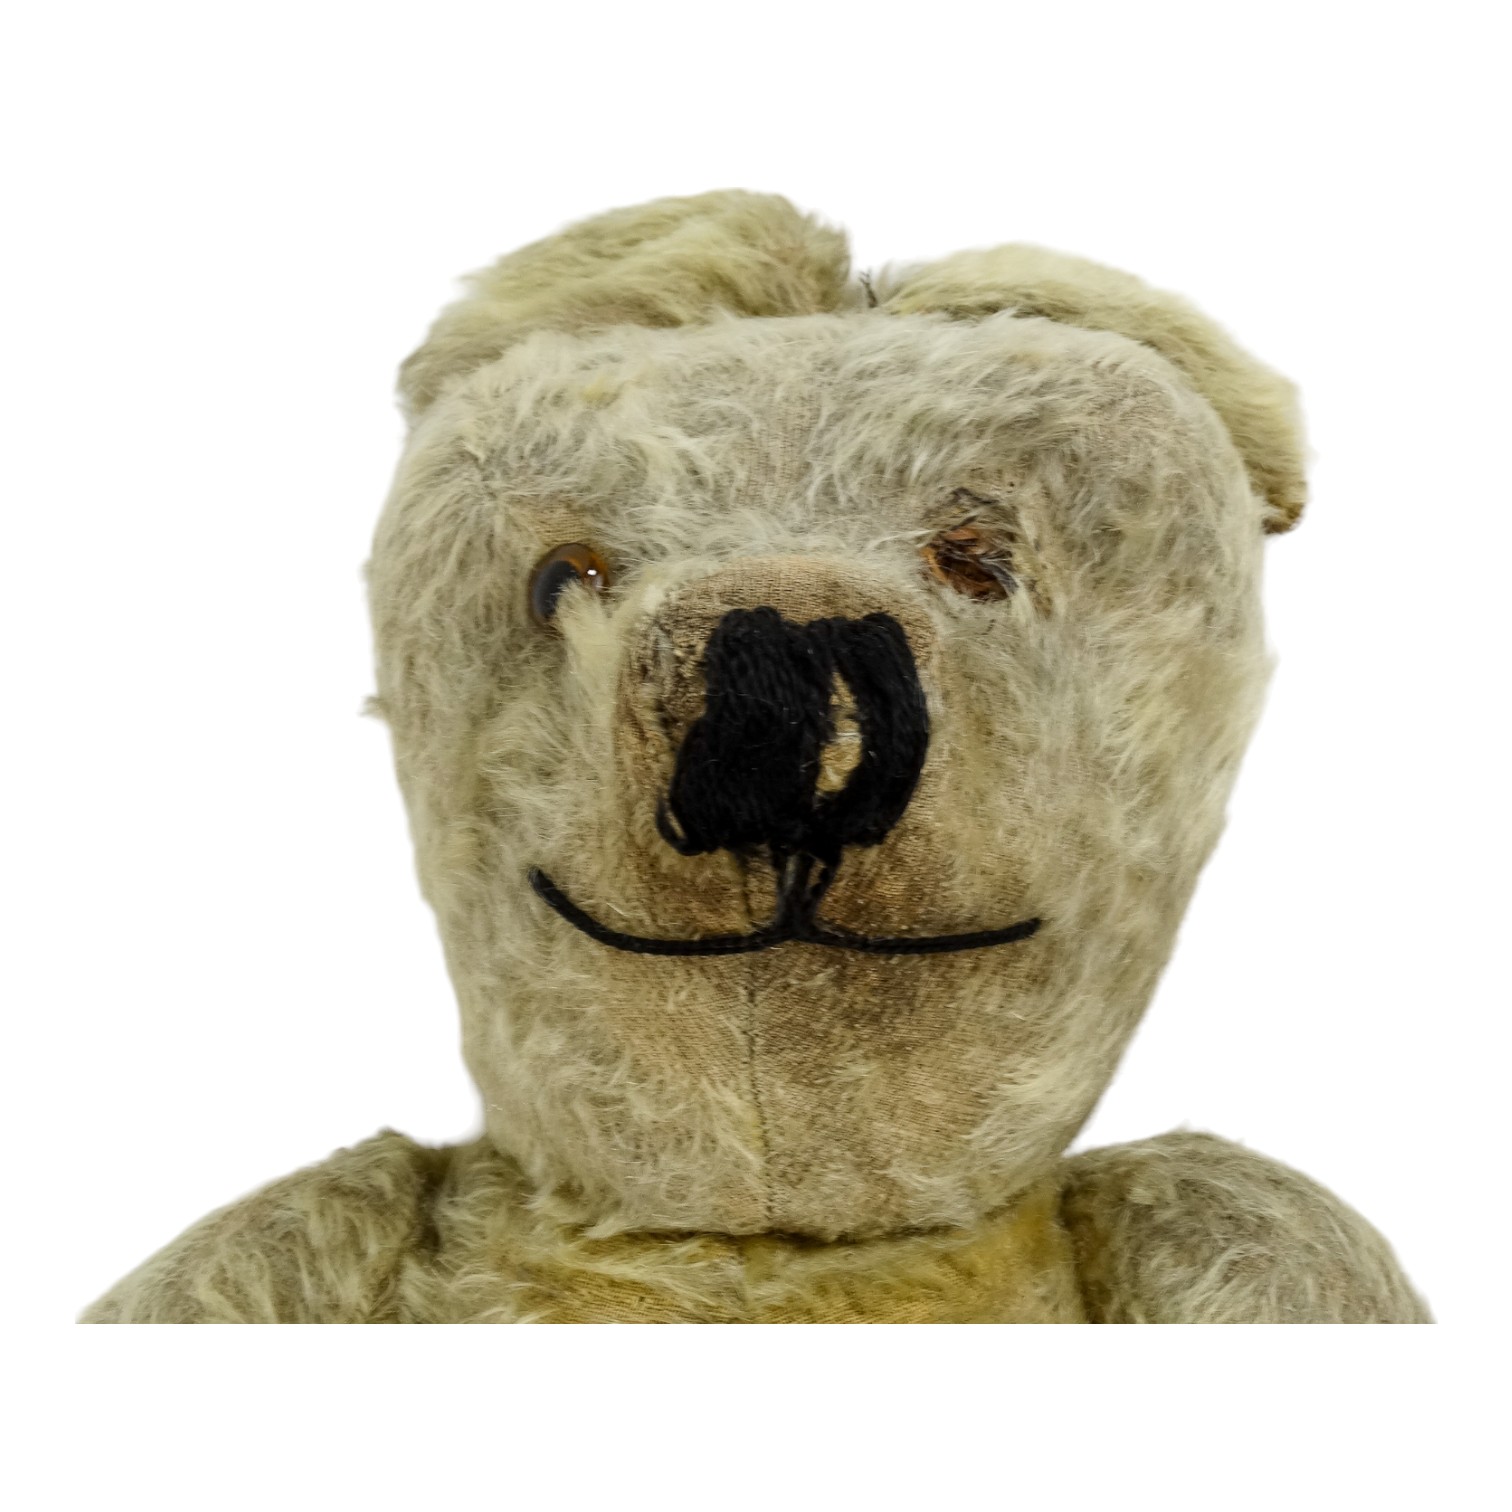 An early 20th century teddy bear - gold plush with articulated limbs, pad paws, stitched features - Image 3 of 6